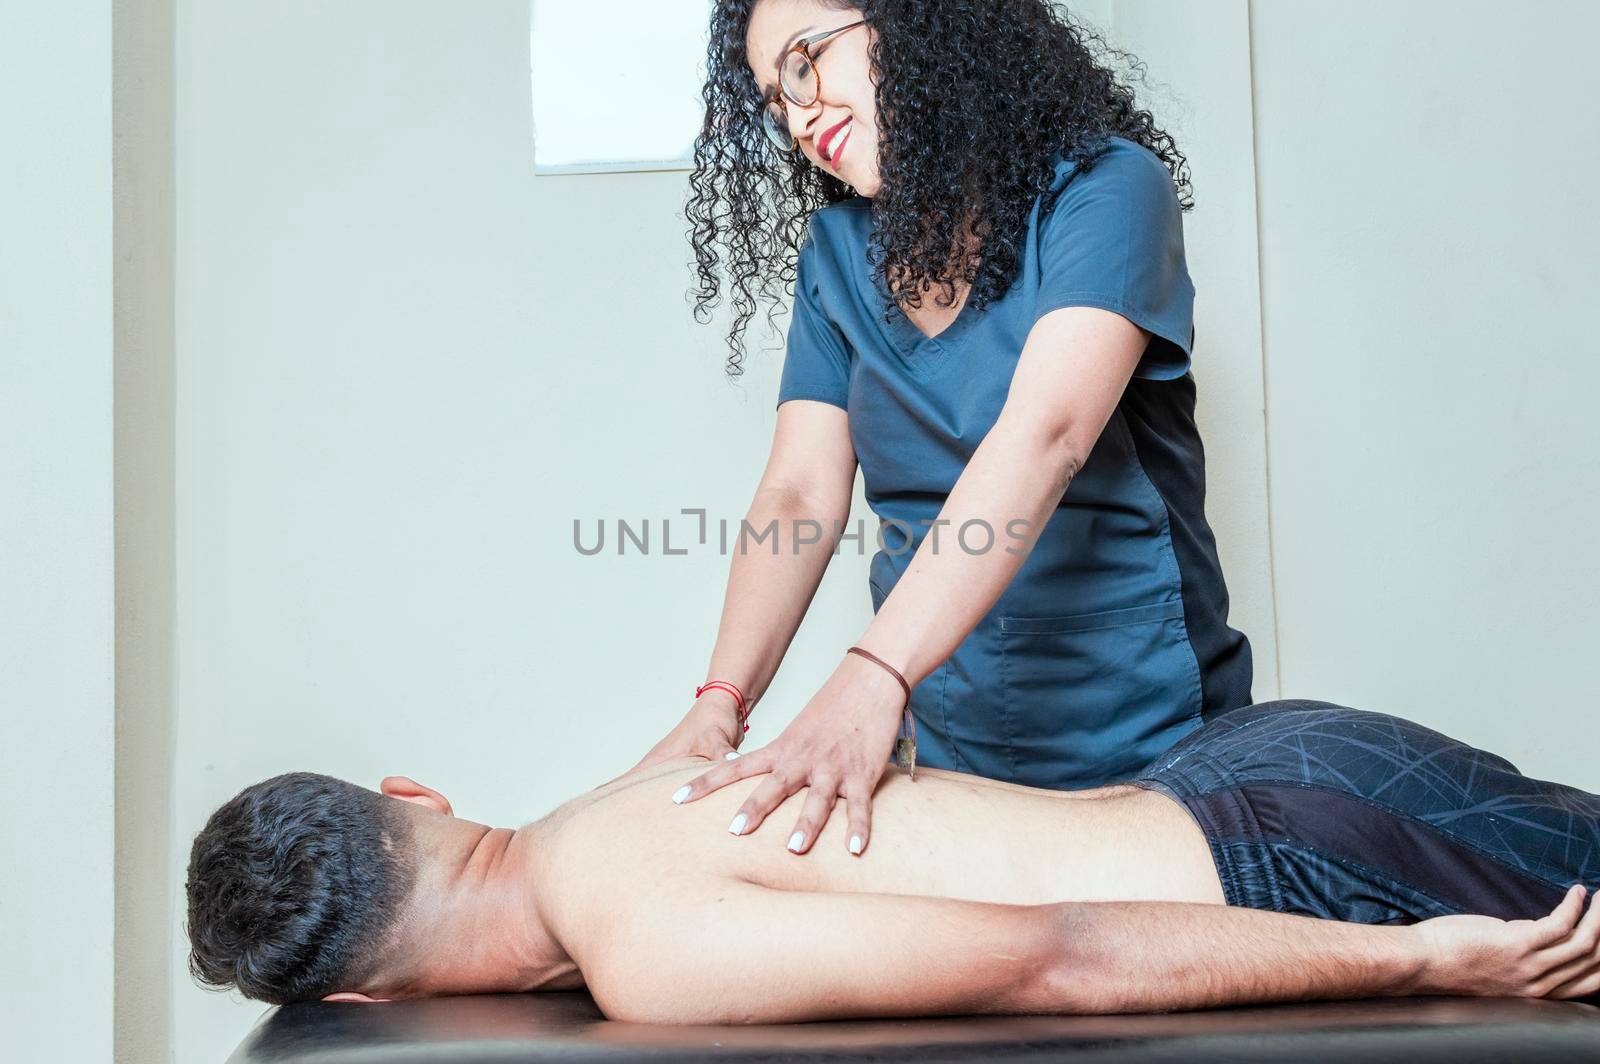 Physiotherapist curing patient's spine problems, man having chiropractic back adjustment. Rehabilitation of sports injuries.